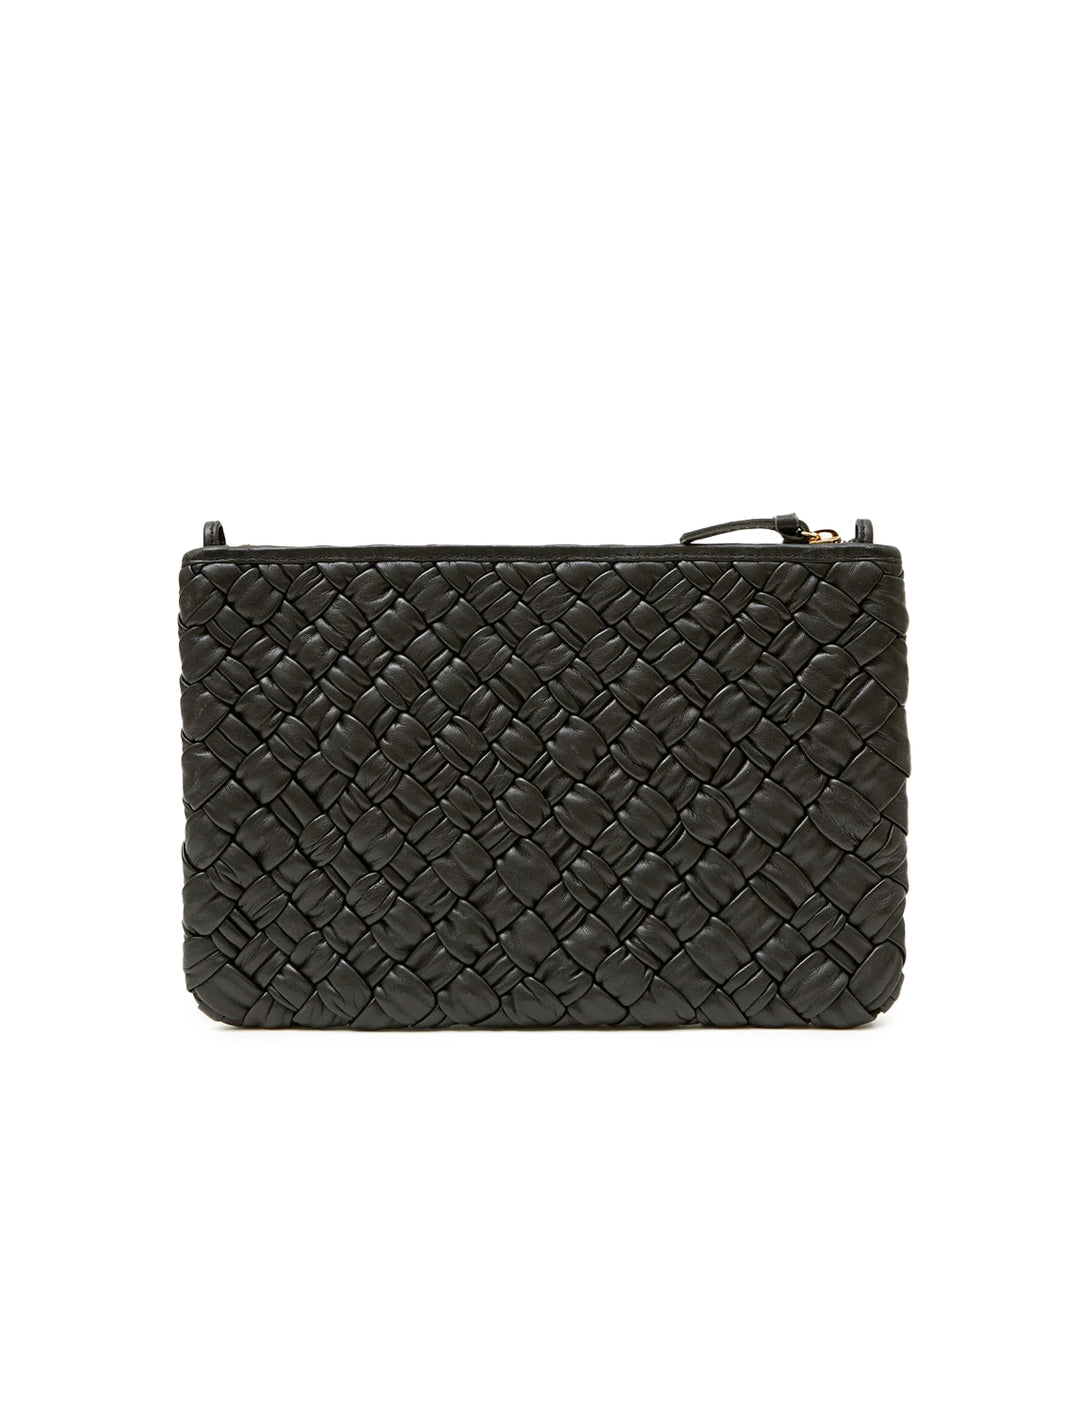 Back view of Clare V.'s flat clutch with tabs in puffy woven black.